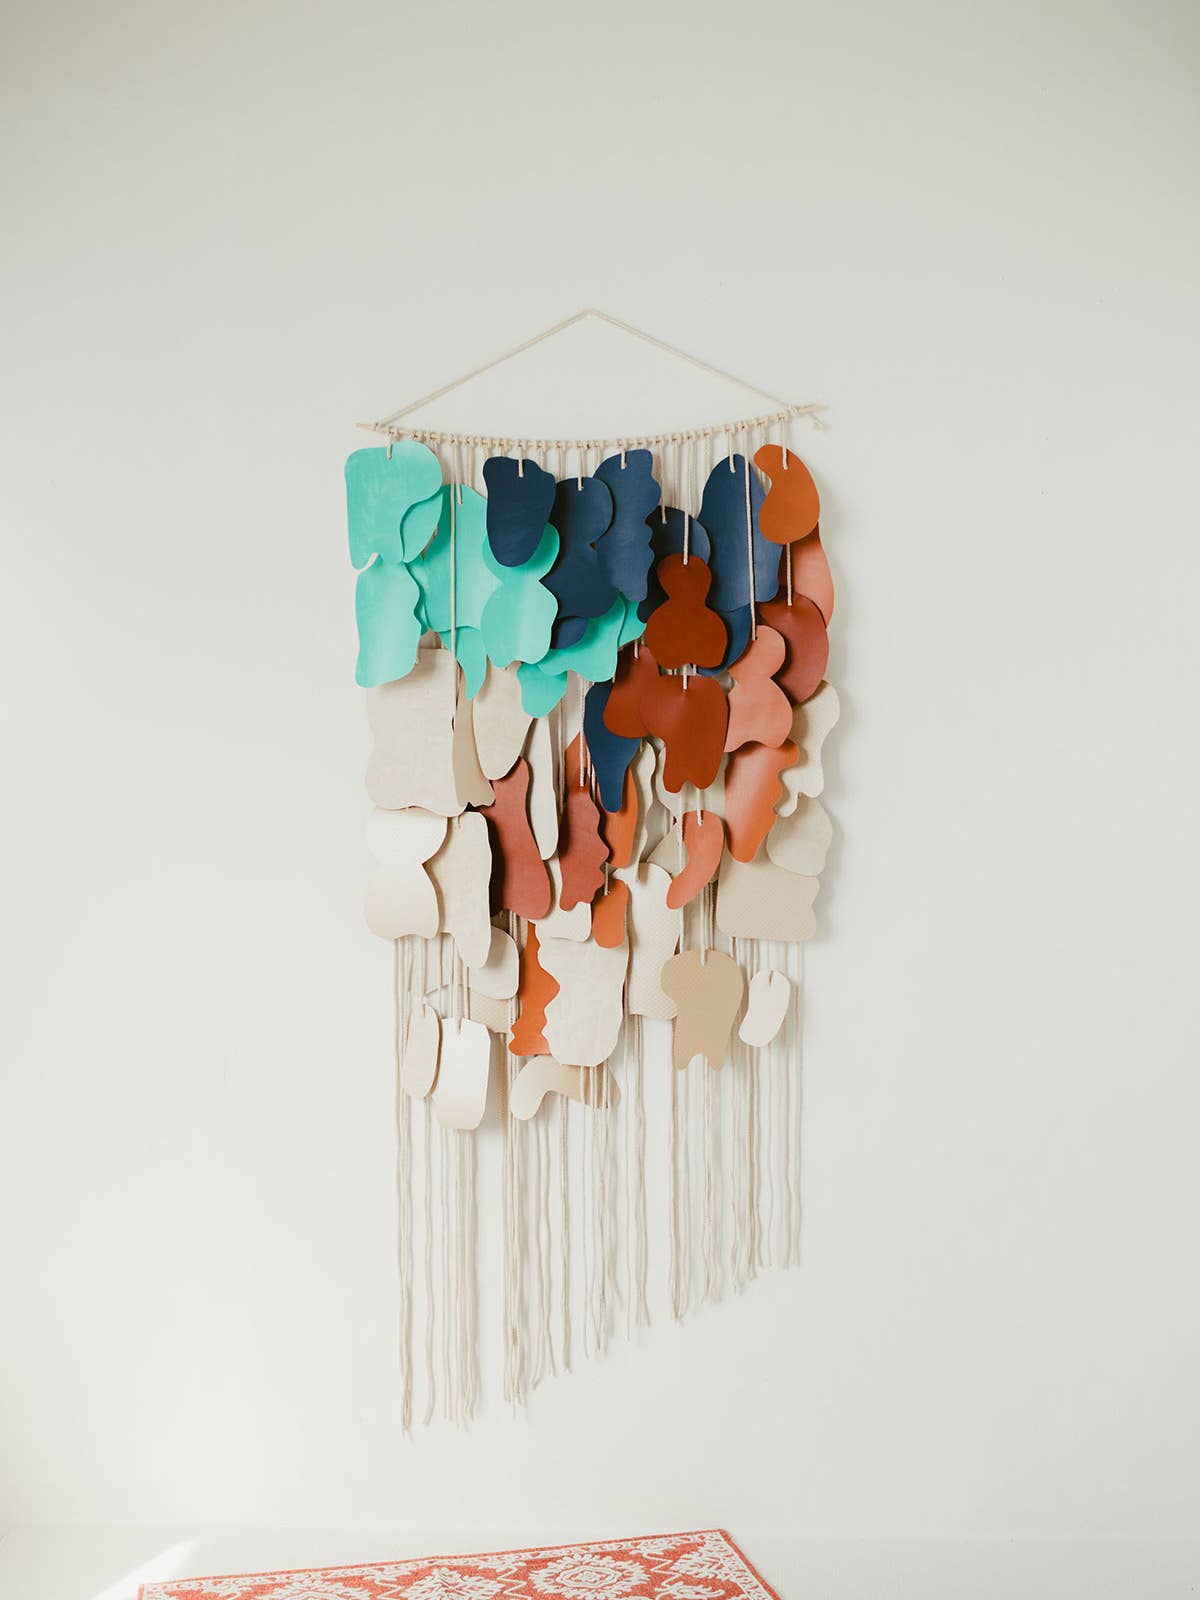 Trust Us: You Can Definitely Make Your Own Awe-Inspiring Wall Hanging